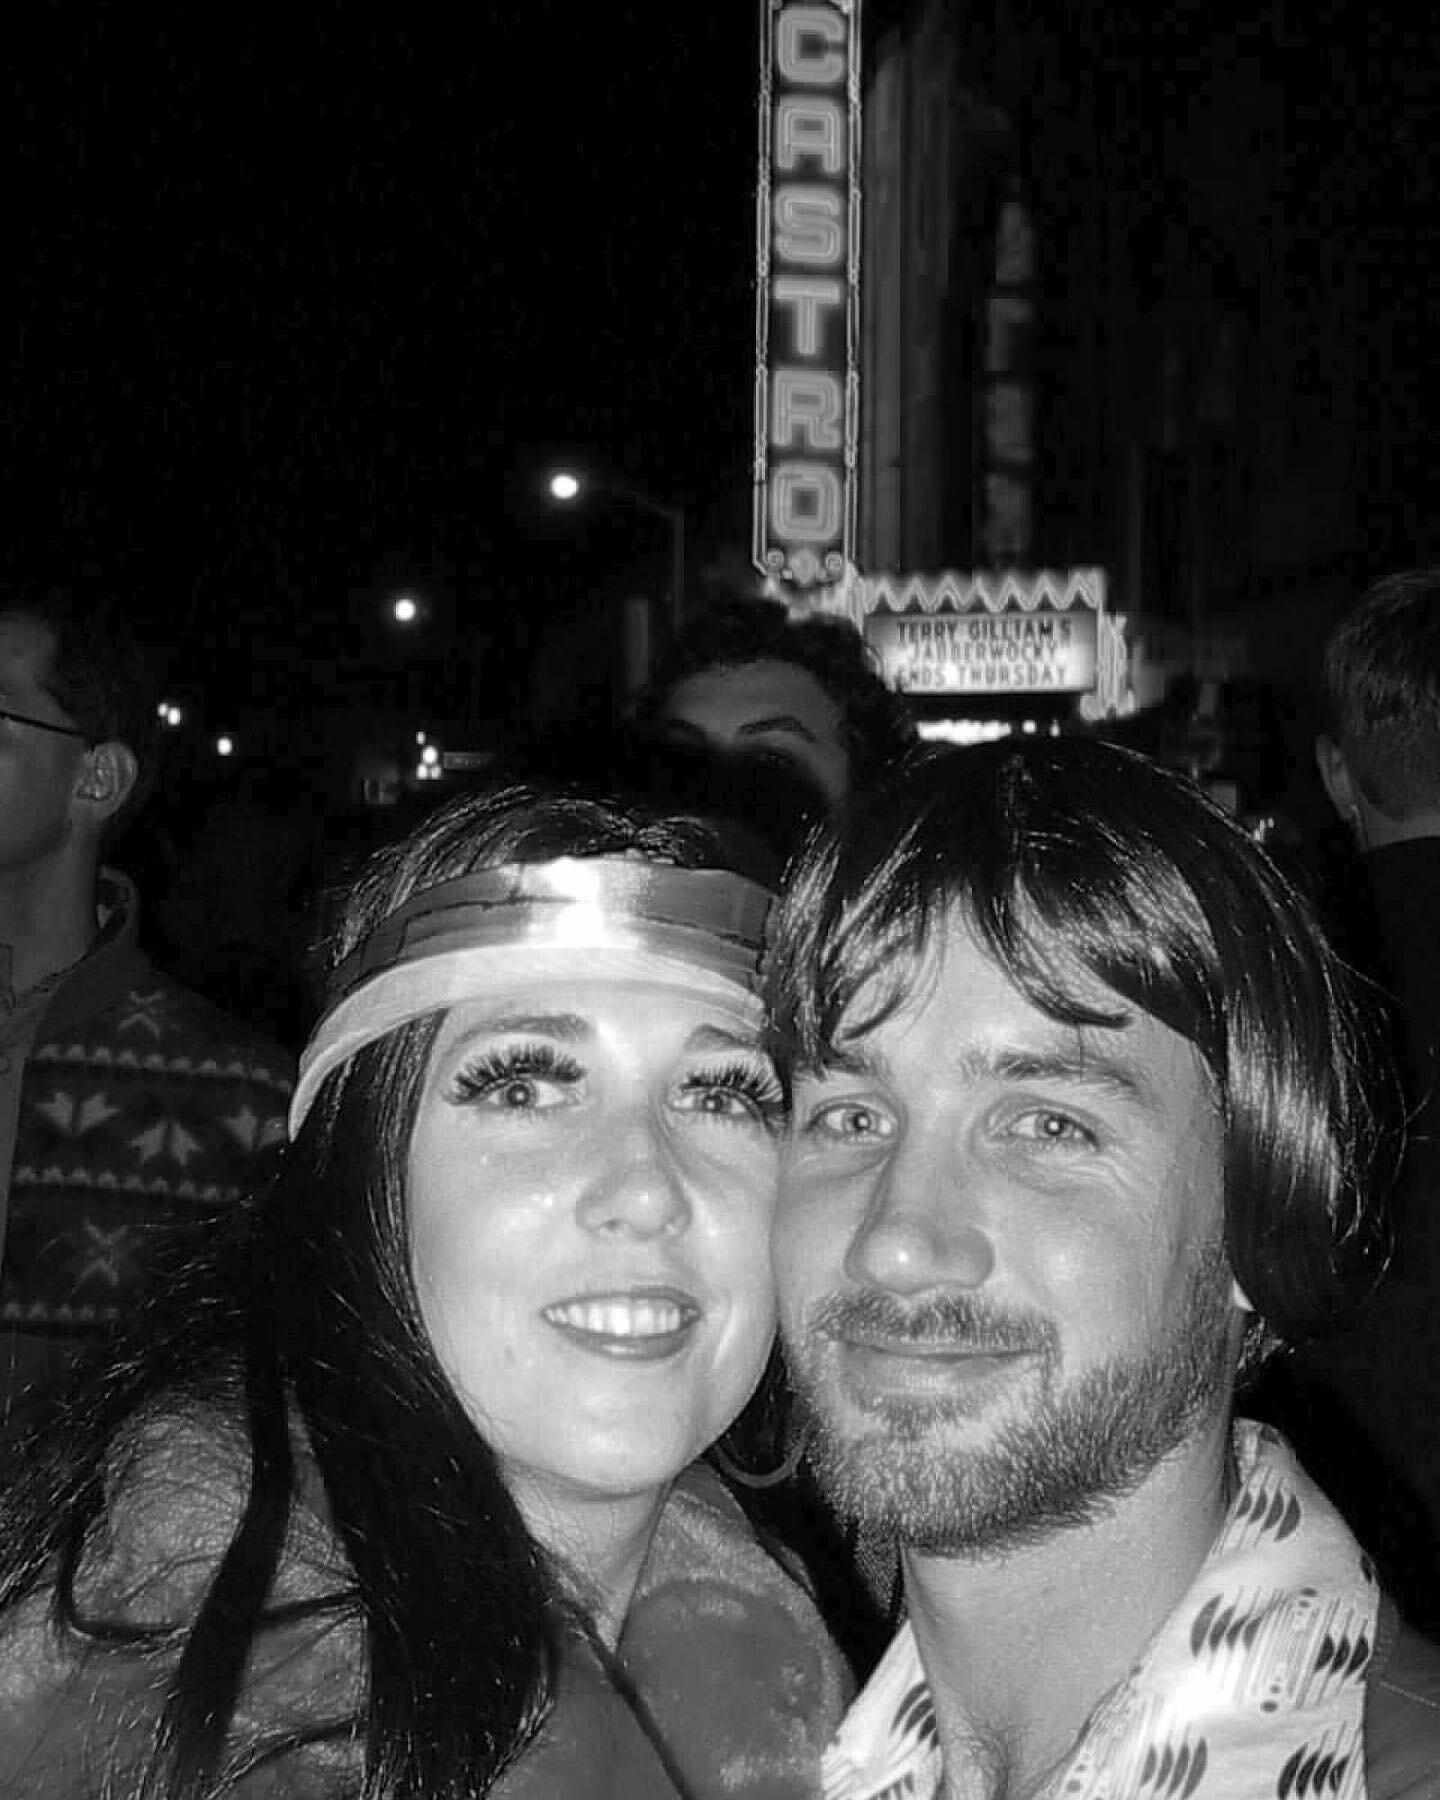 Throw back to one of our first Halloweens. One in college and one who can&rsquo;t even with her parents, we are sitting wondering where the time went. I still got you, babe. Mostly. But my wrists hurt&hellip;..and my back&hellip;.